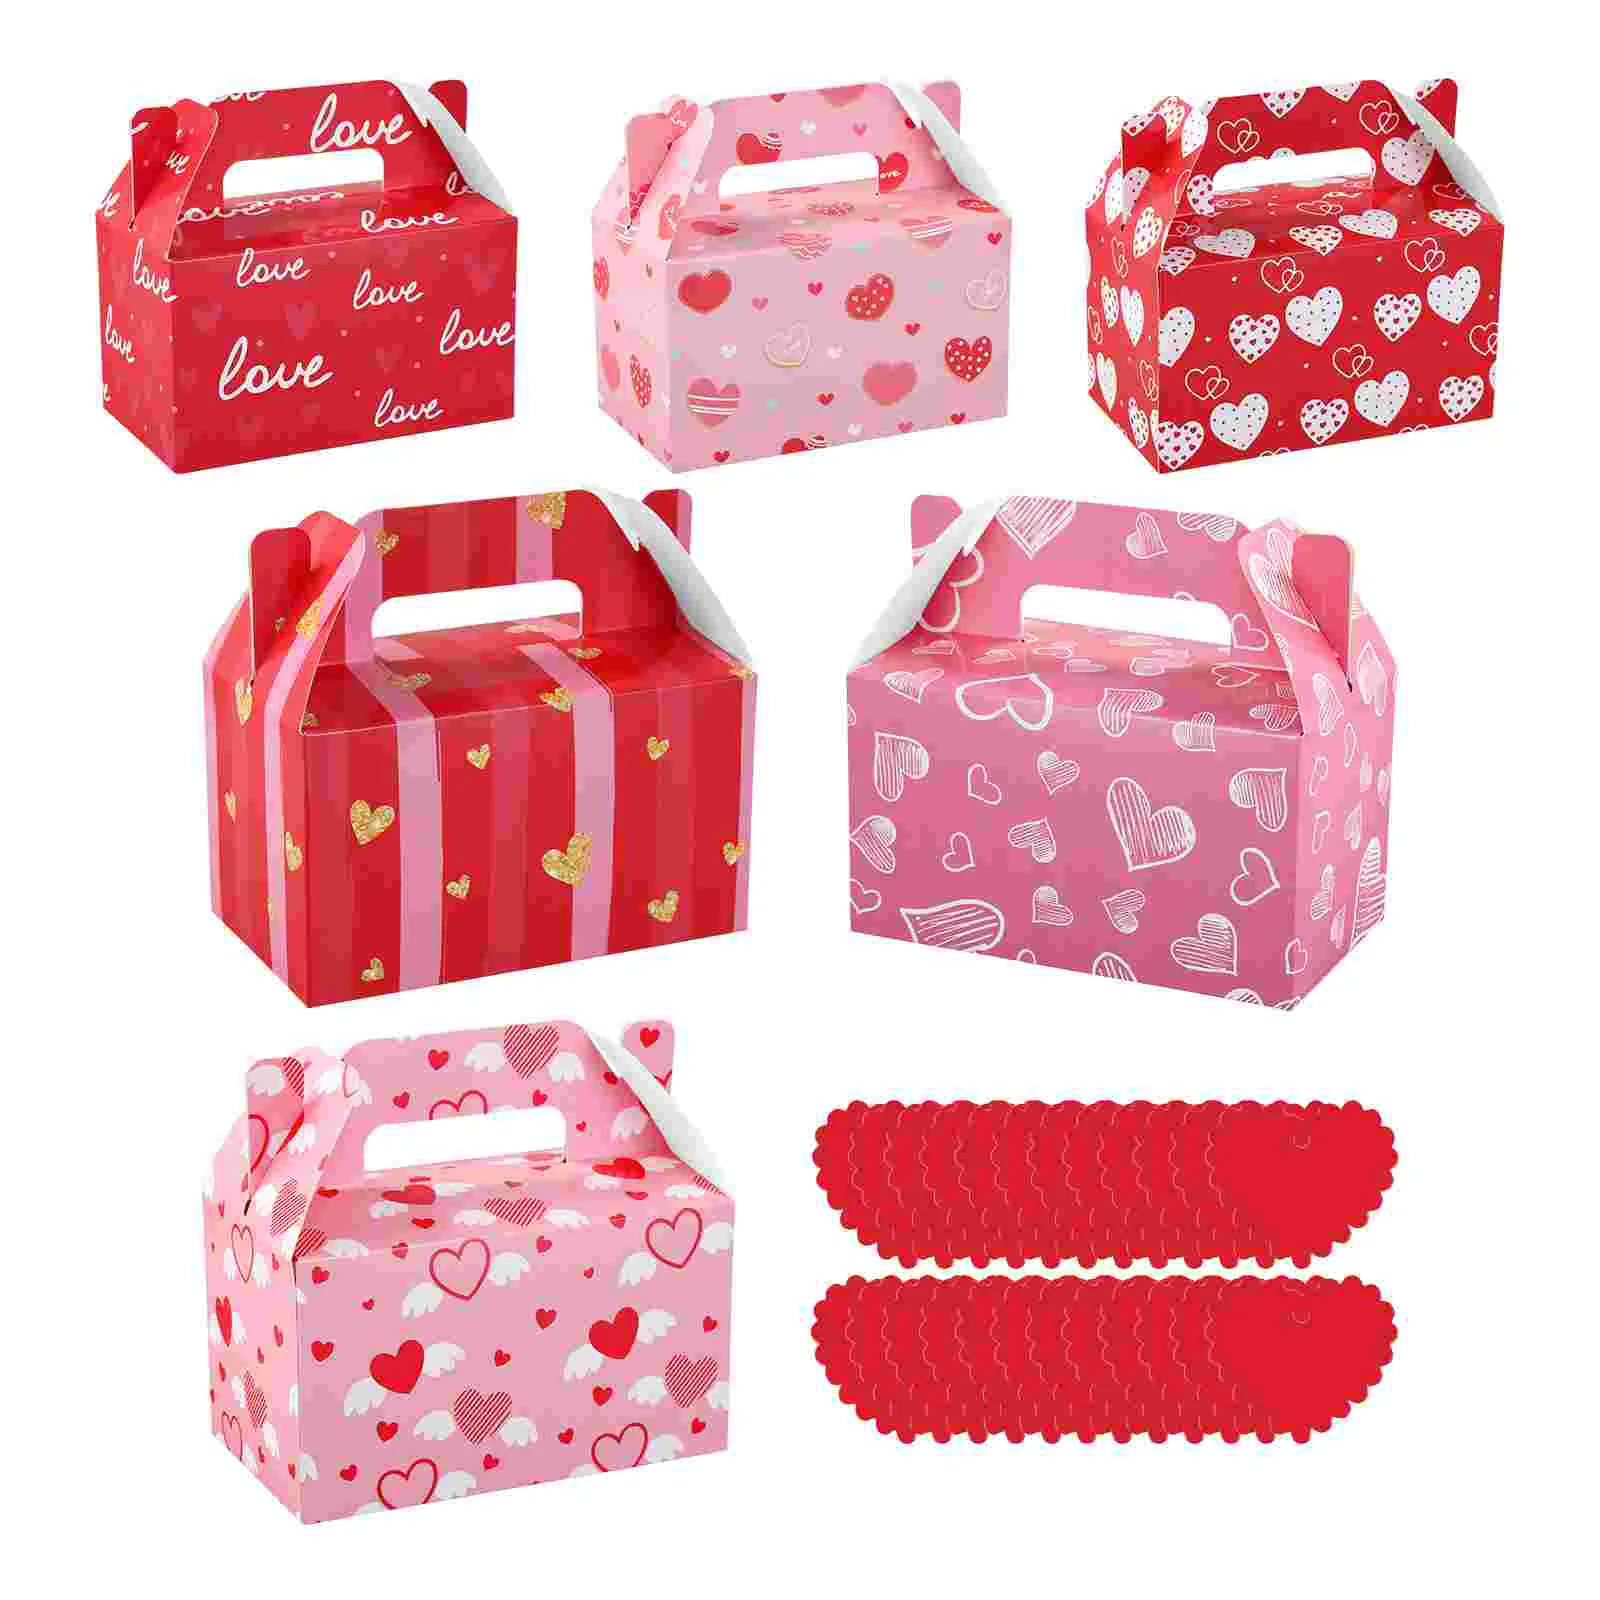 

24pcs Party Treat Boxes Candy Treat Boxes Donut Goodie Bags Treat Boxes with Handles Cookie Bags for Gift Giving Candy Boxes